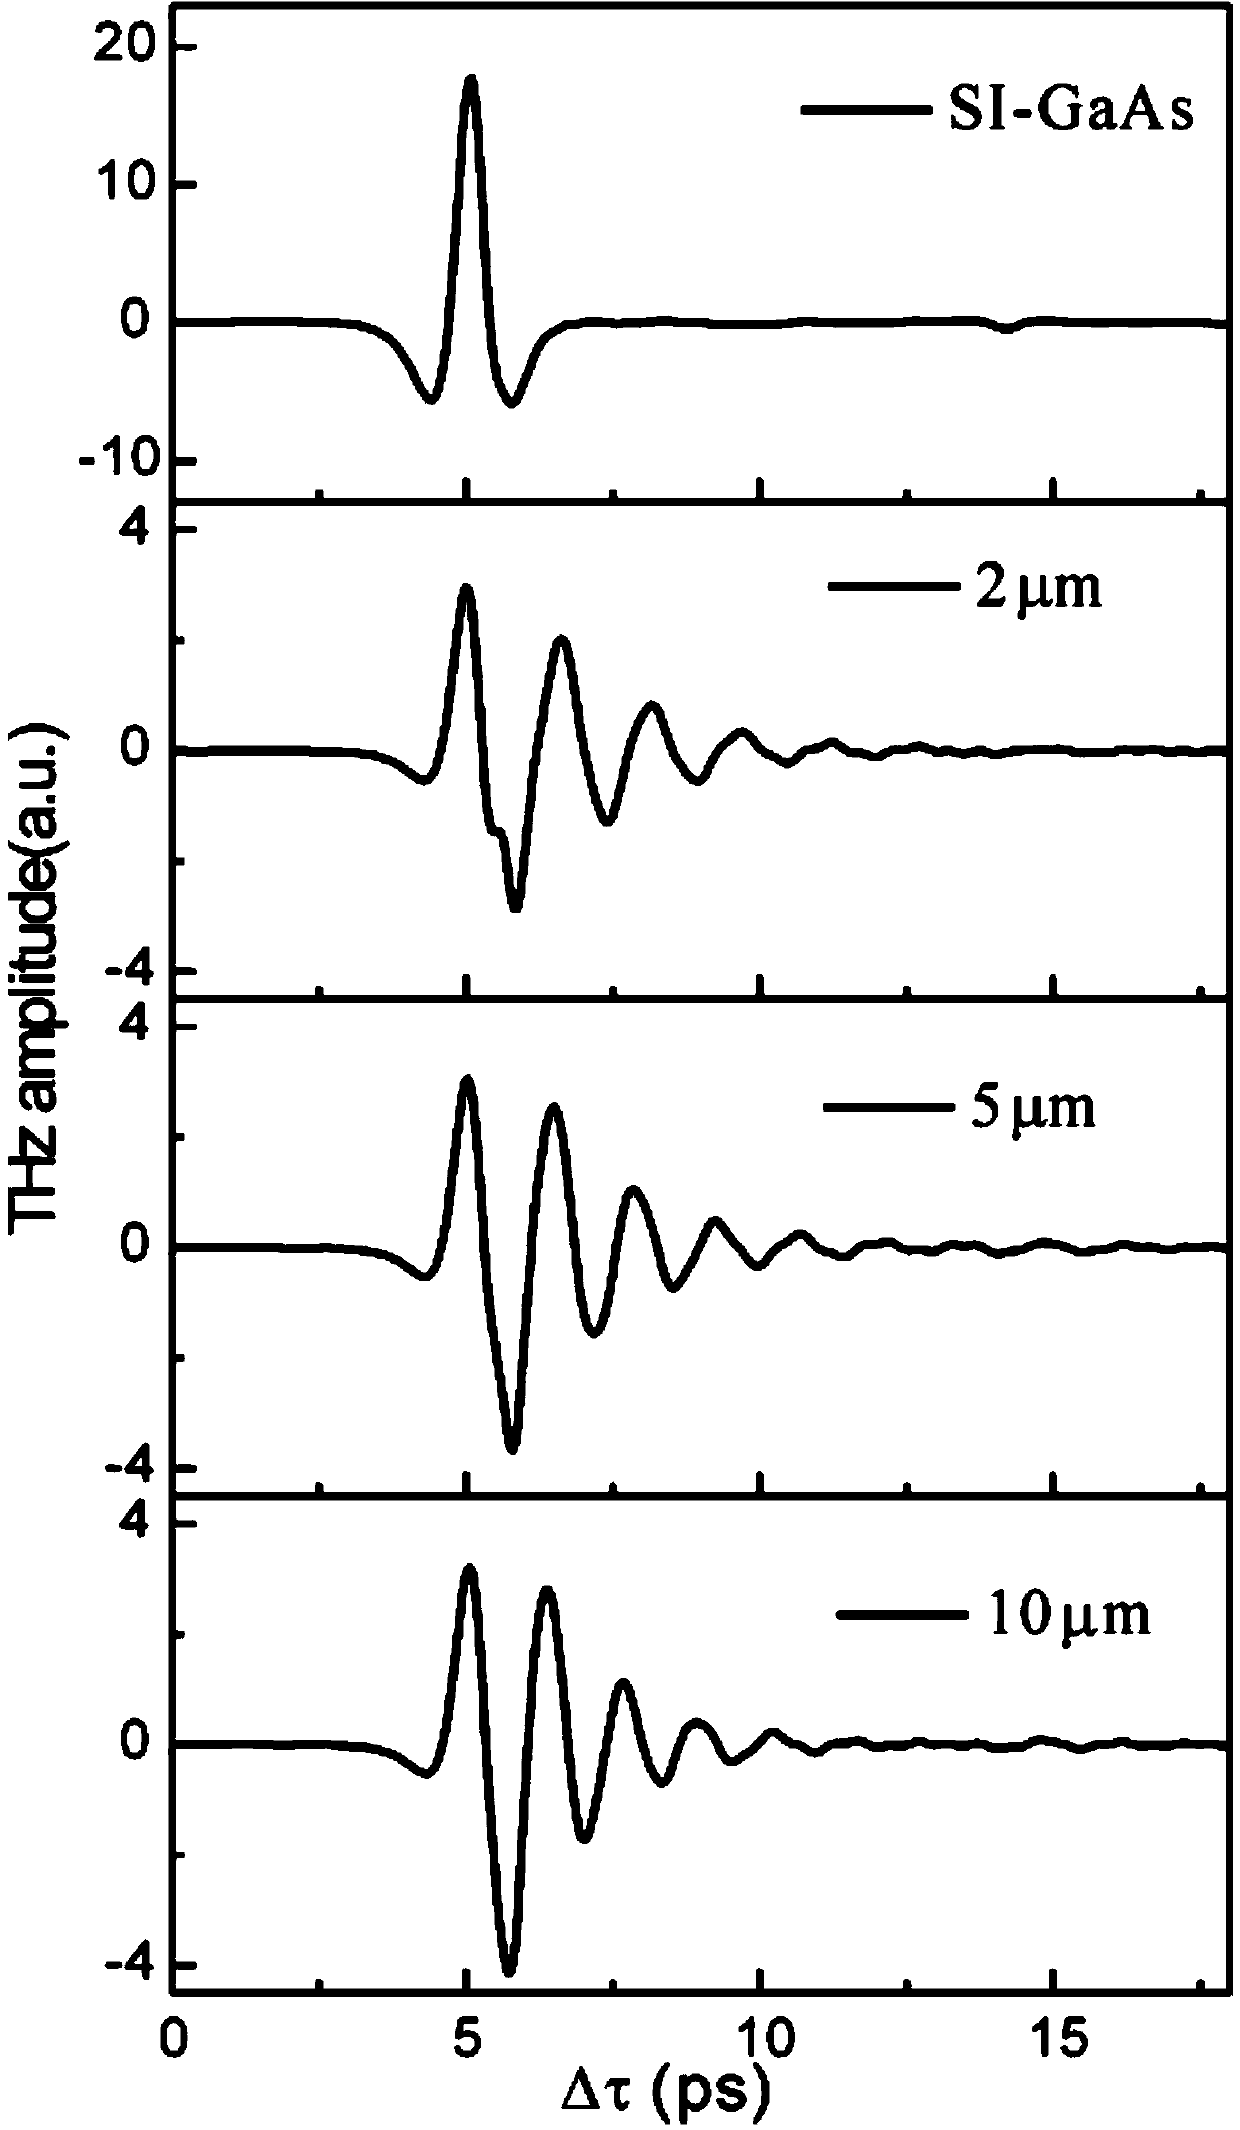 Dual-frequency terahertz band-pass filter